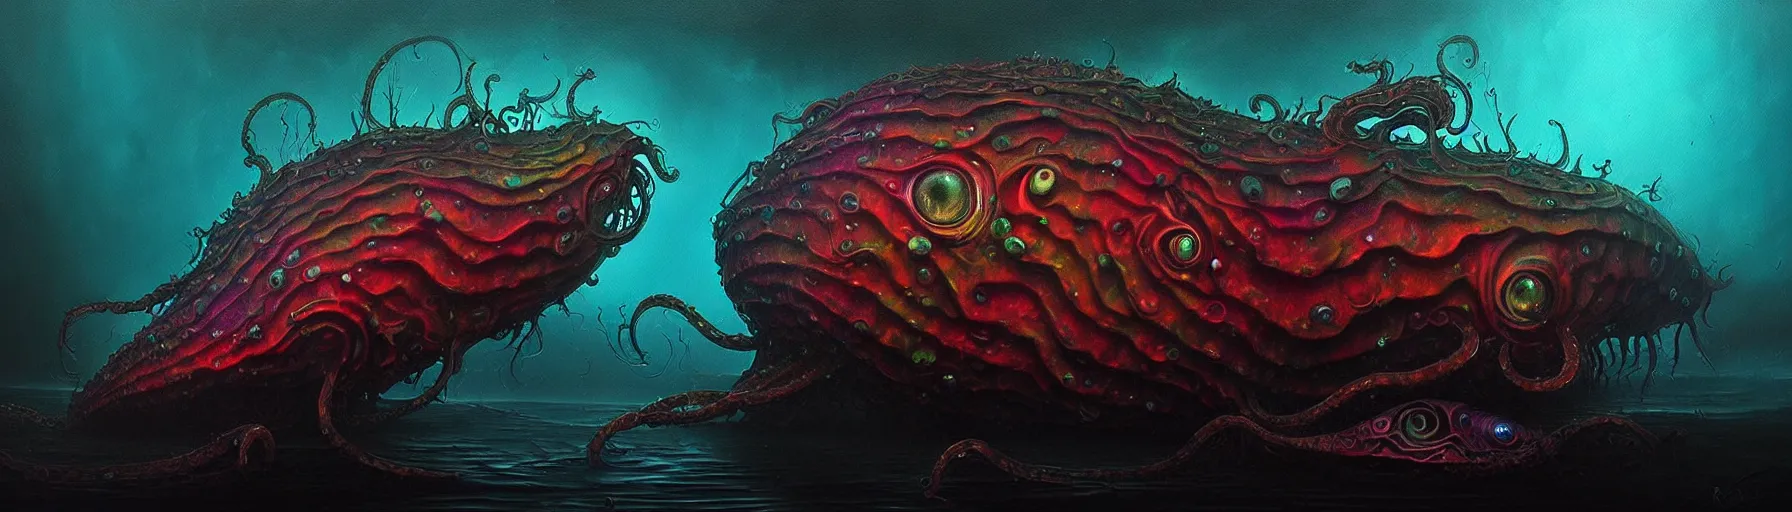 Image similar to strange cuttle fish like creatures from the depths of the imaginal realm, dark eerie dramatic lighting, detailed and atmospheric surreal darkly colorful painting by ronny khalil